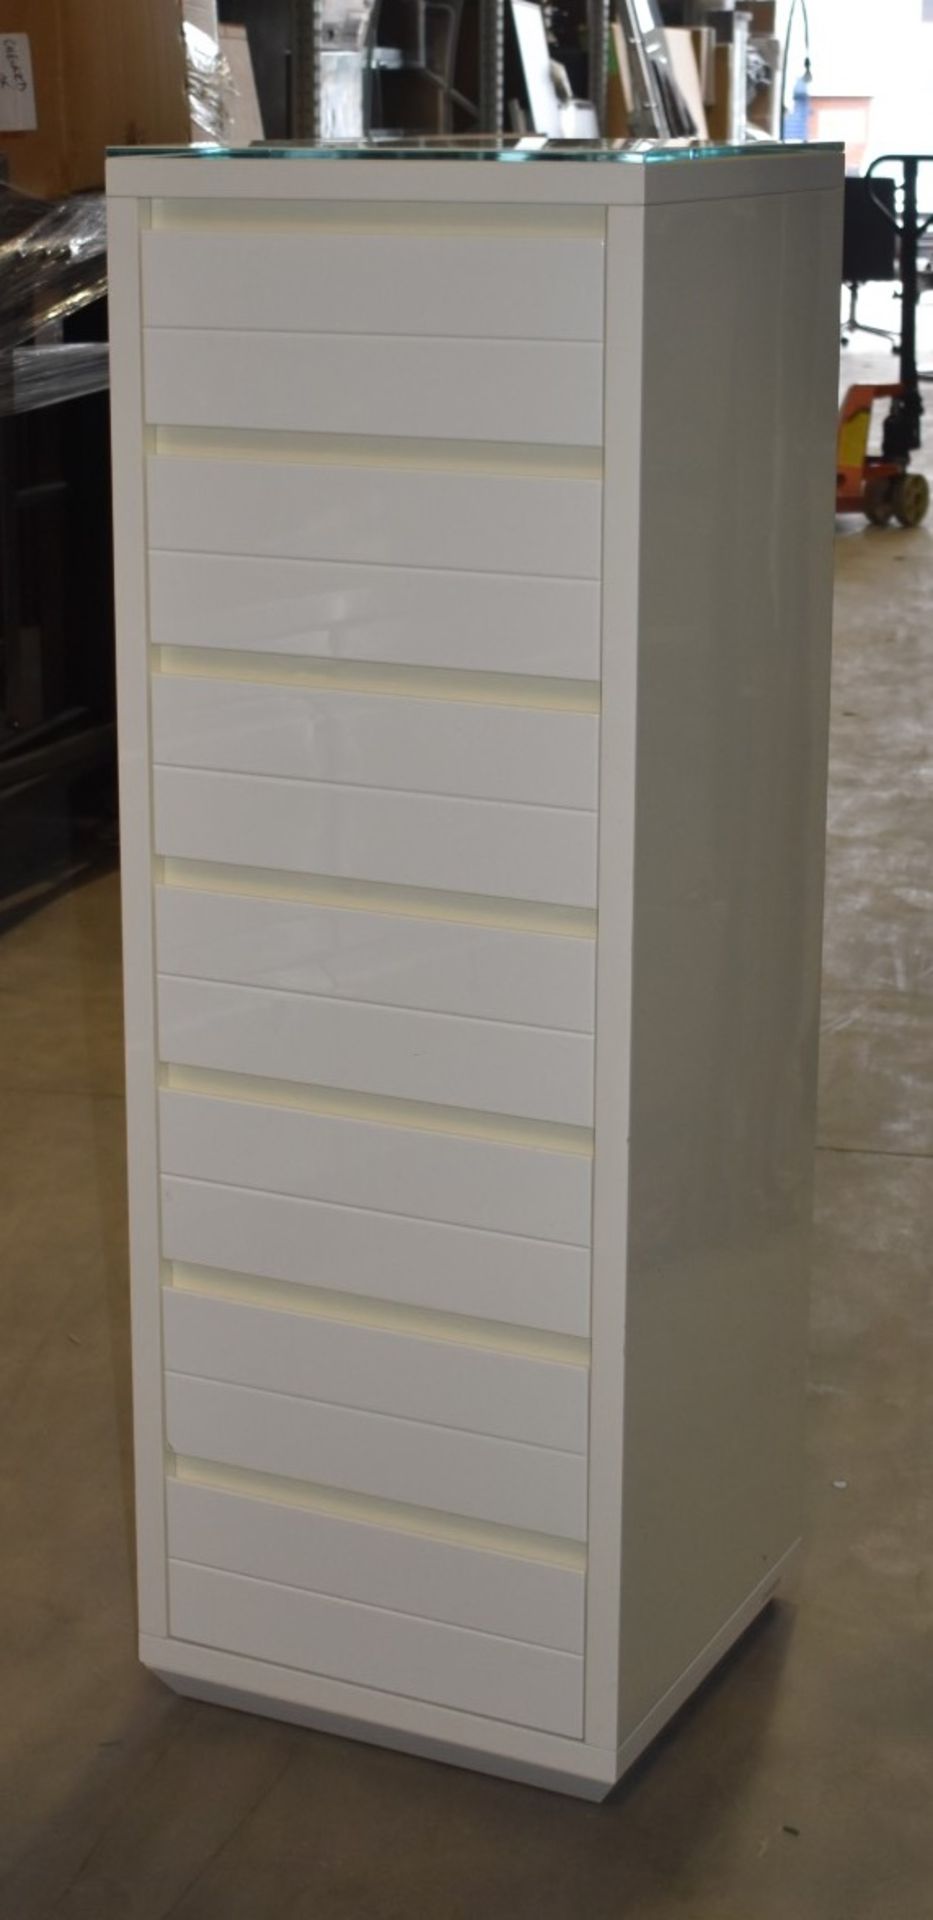 1 x Set of Seven Casabella Adria Bedroom Drawers - White Gloss With Glass Top and Soft Close Drawers - Image 6 of 6